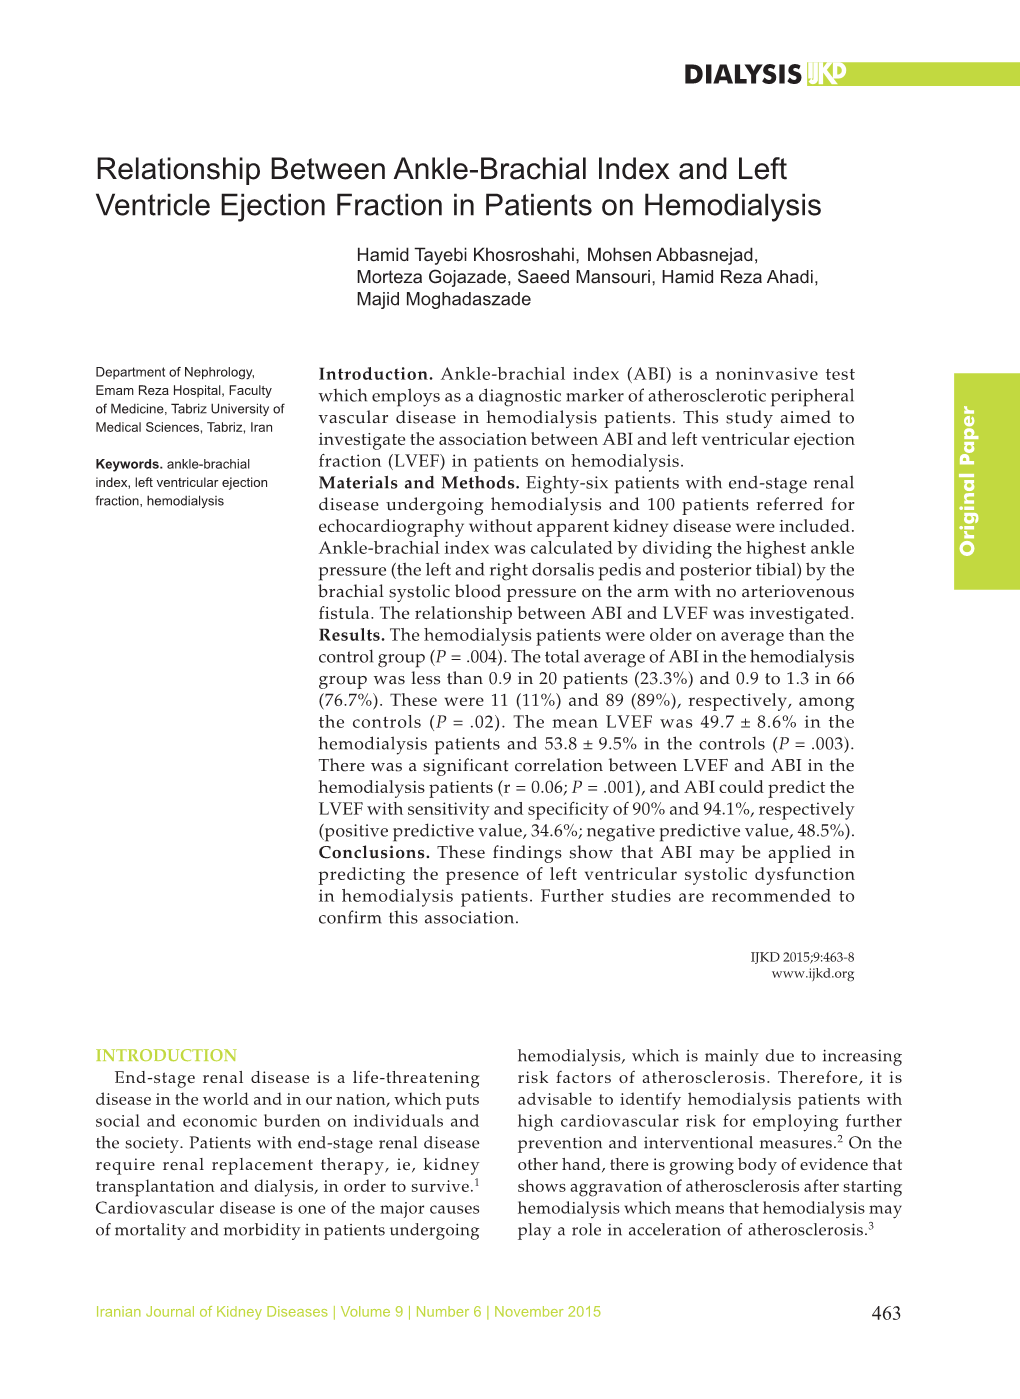 Relationship Between Ankle-Brachial Index and Left Ventricle Ejection Fraction in Patients on Hemodialysis